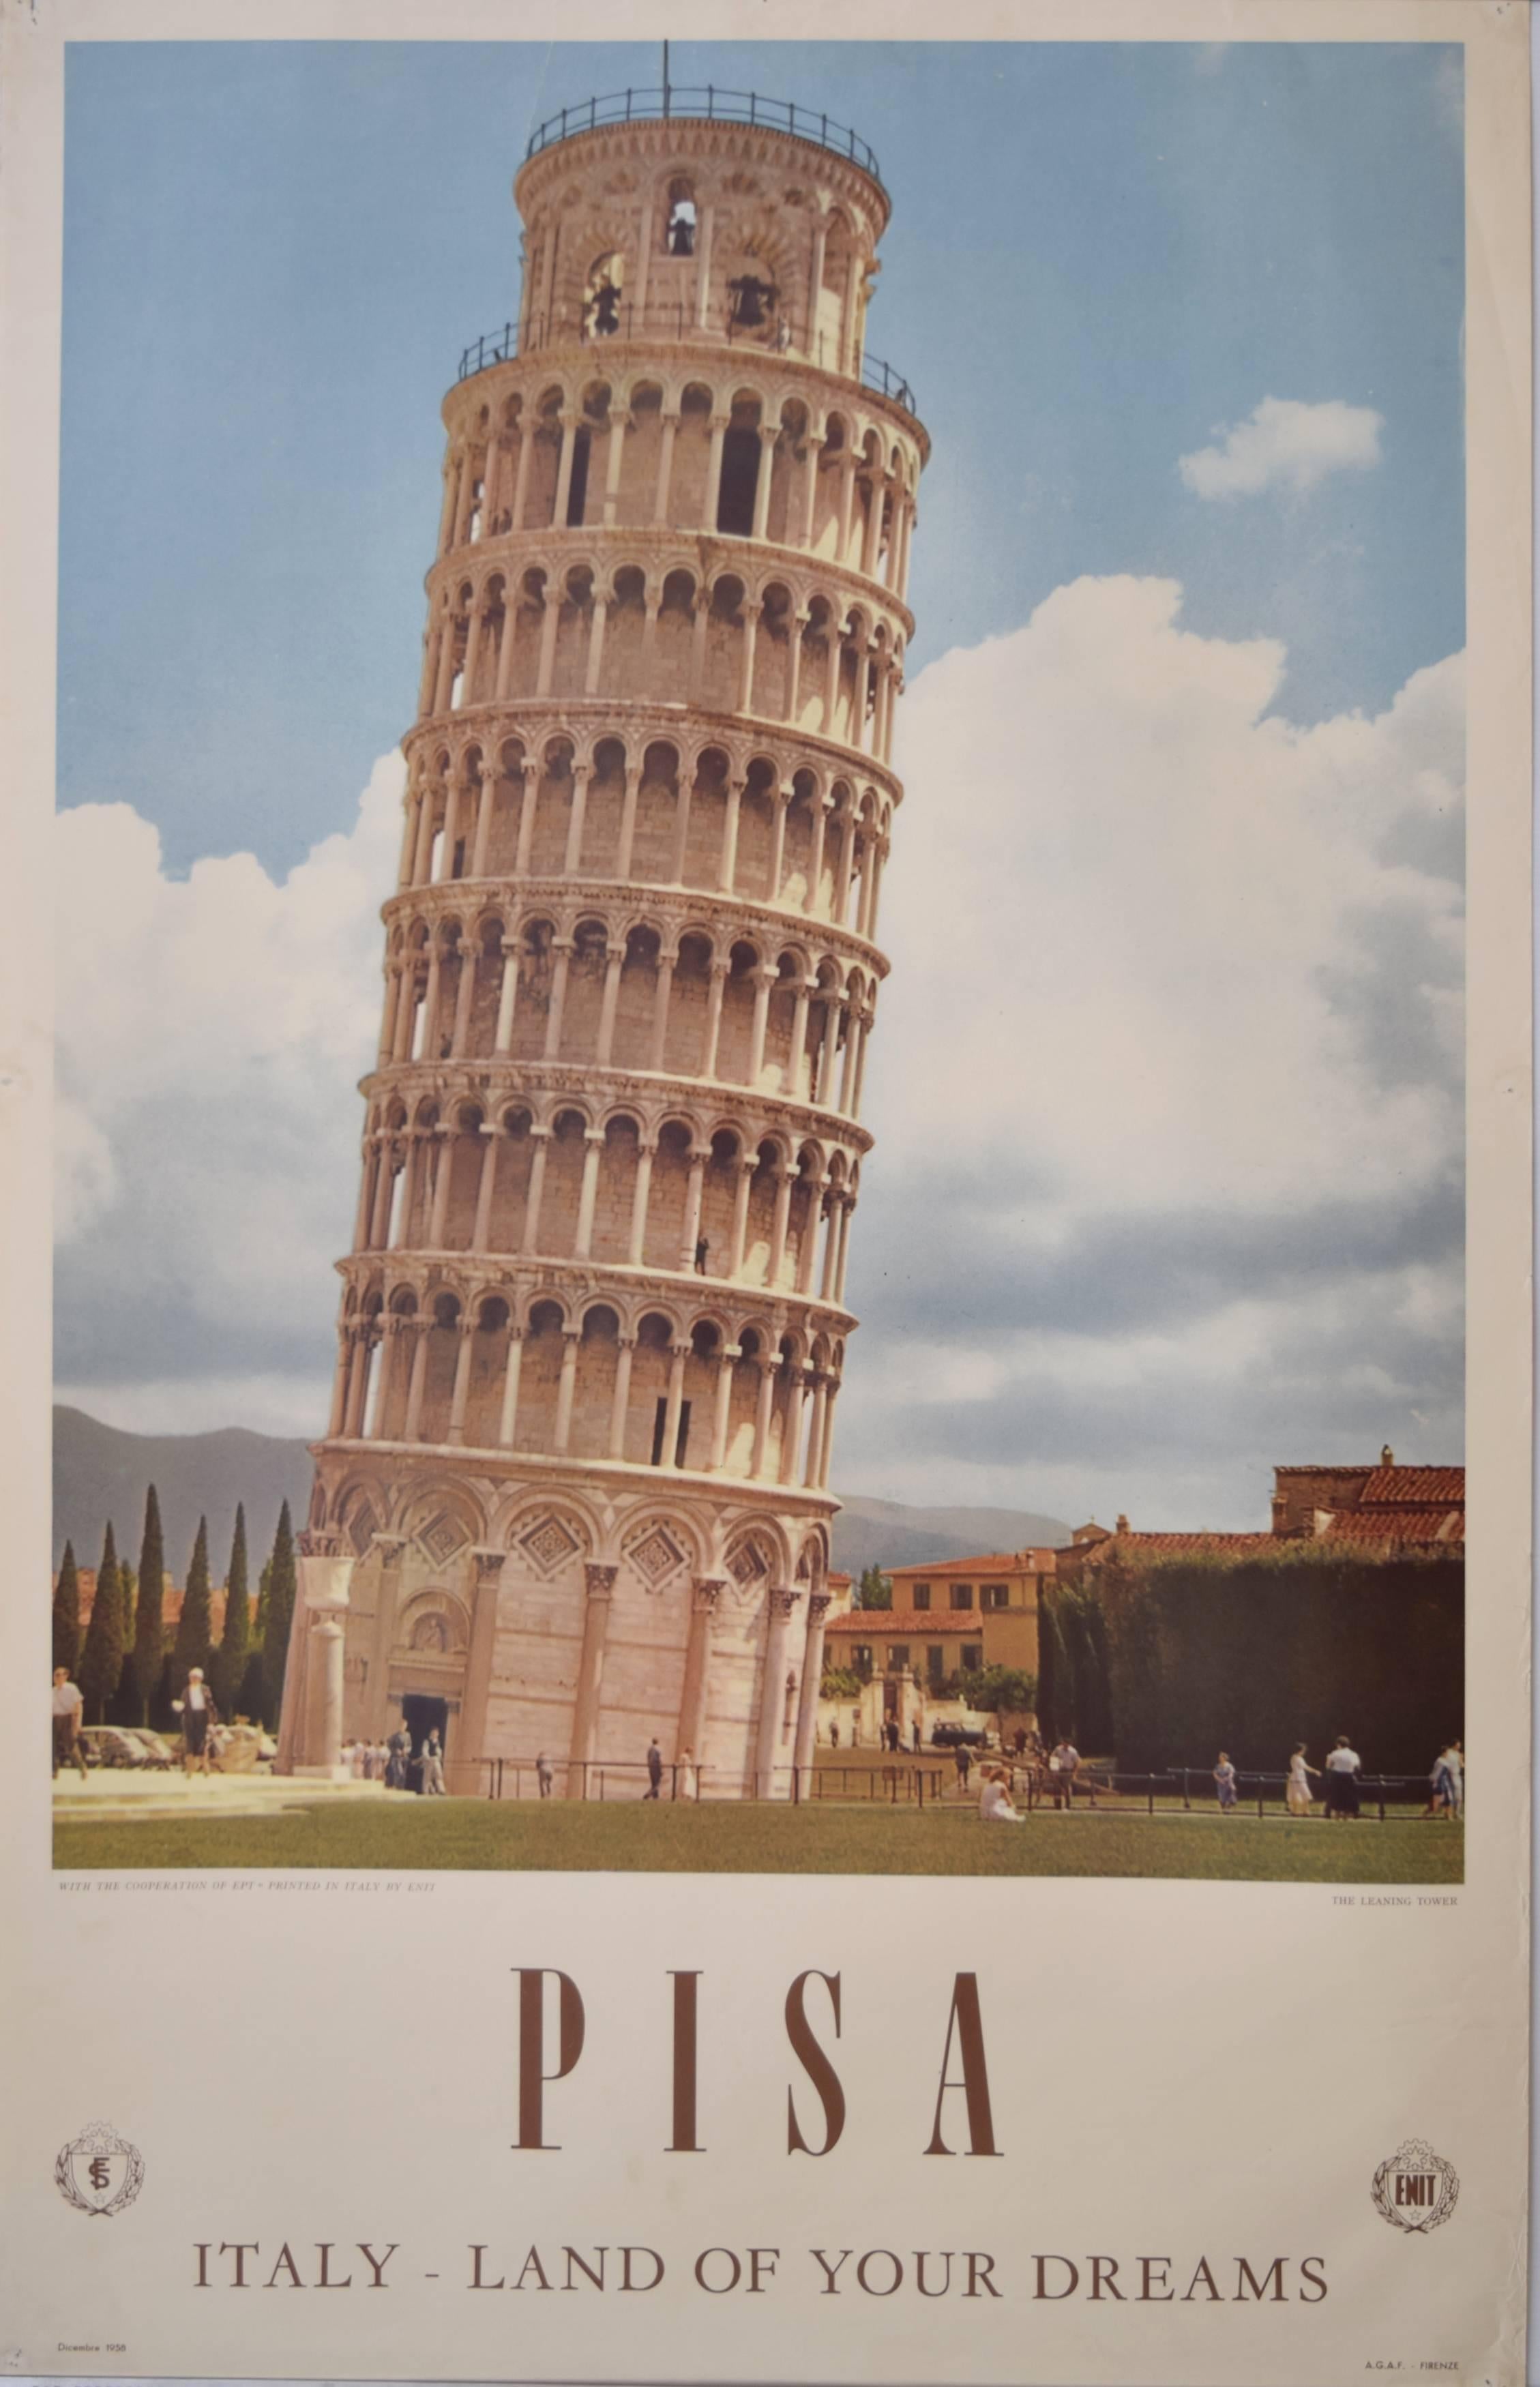 Unknown Landscape Photograph - Leaning Tower of Pisa: Italy original vintage poster 1958 - Land of Your Dreams